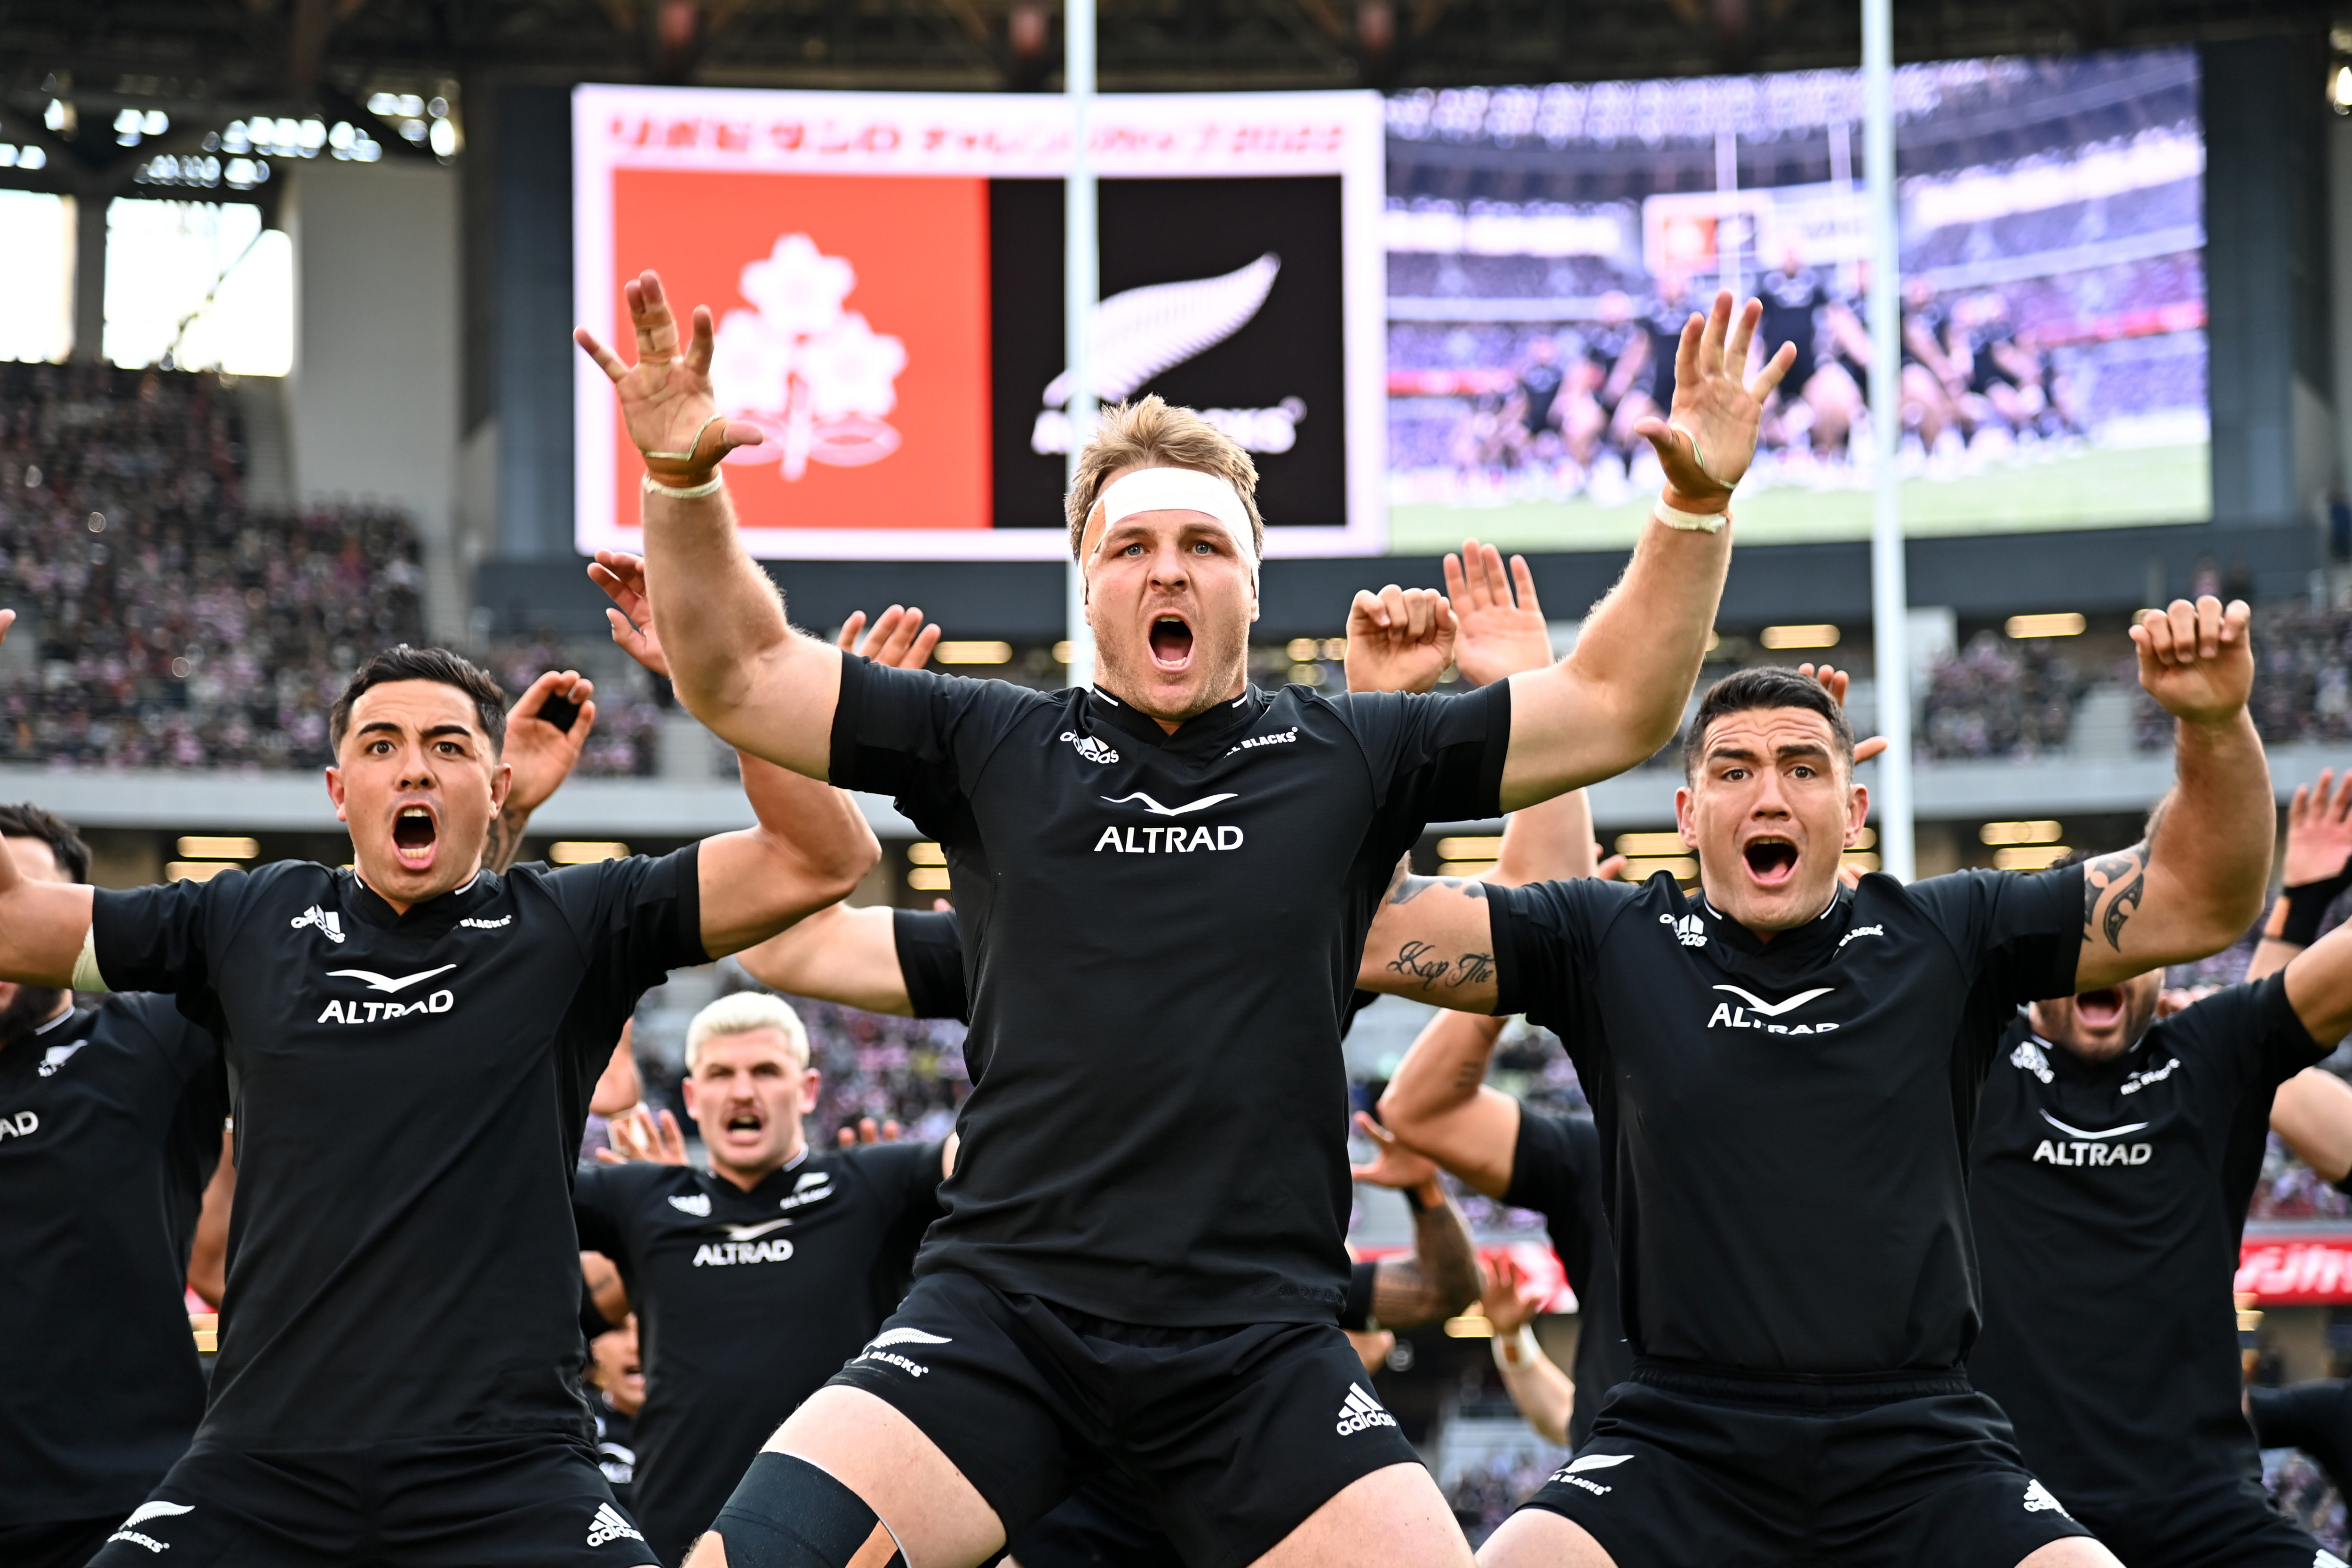 TOKYO, JAPAN - OCTOBER 29: Sam Cane of New Zealand leads the Haka prior to the international test match between Japan and New Zealand All Blacks at National Stadium on October 29, 2022 in Tokyo, Japan. (Photo by Kenta Harada/Getty Images)